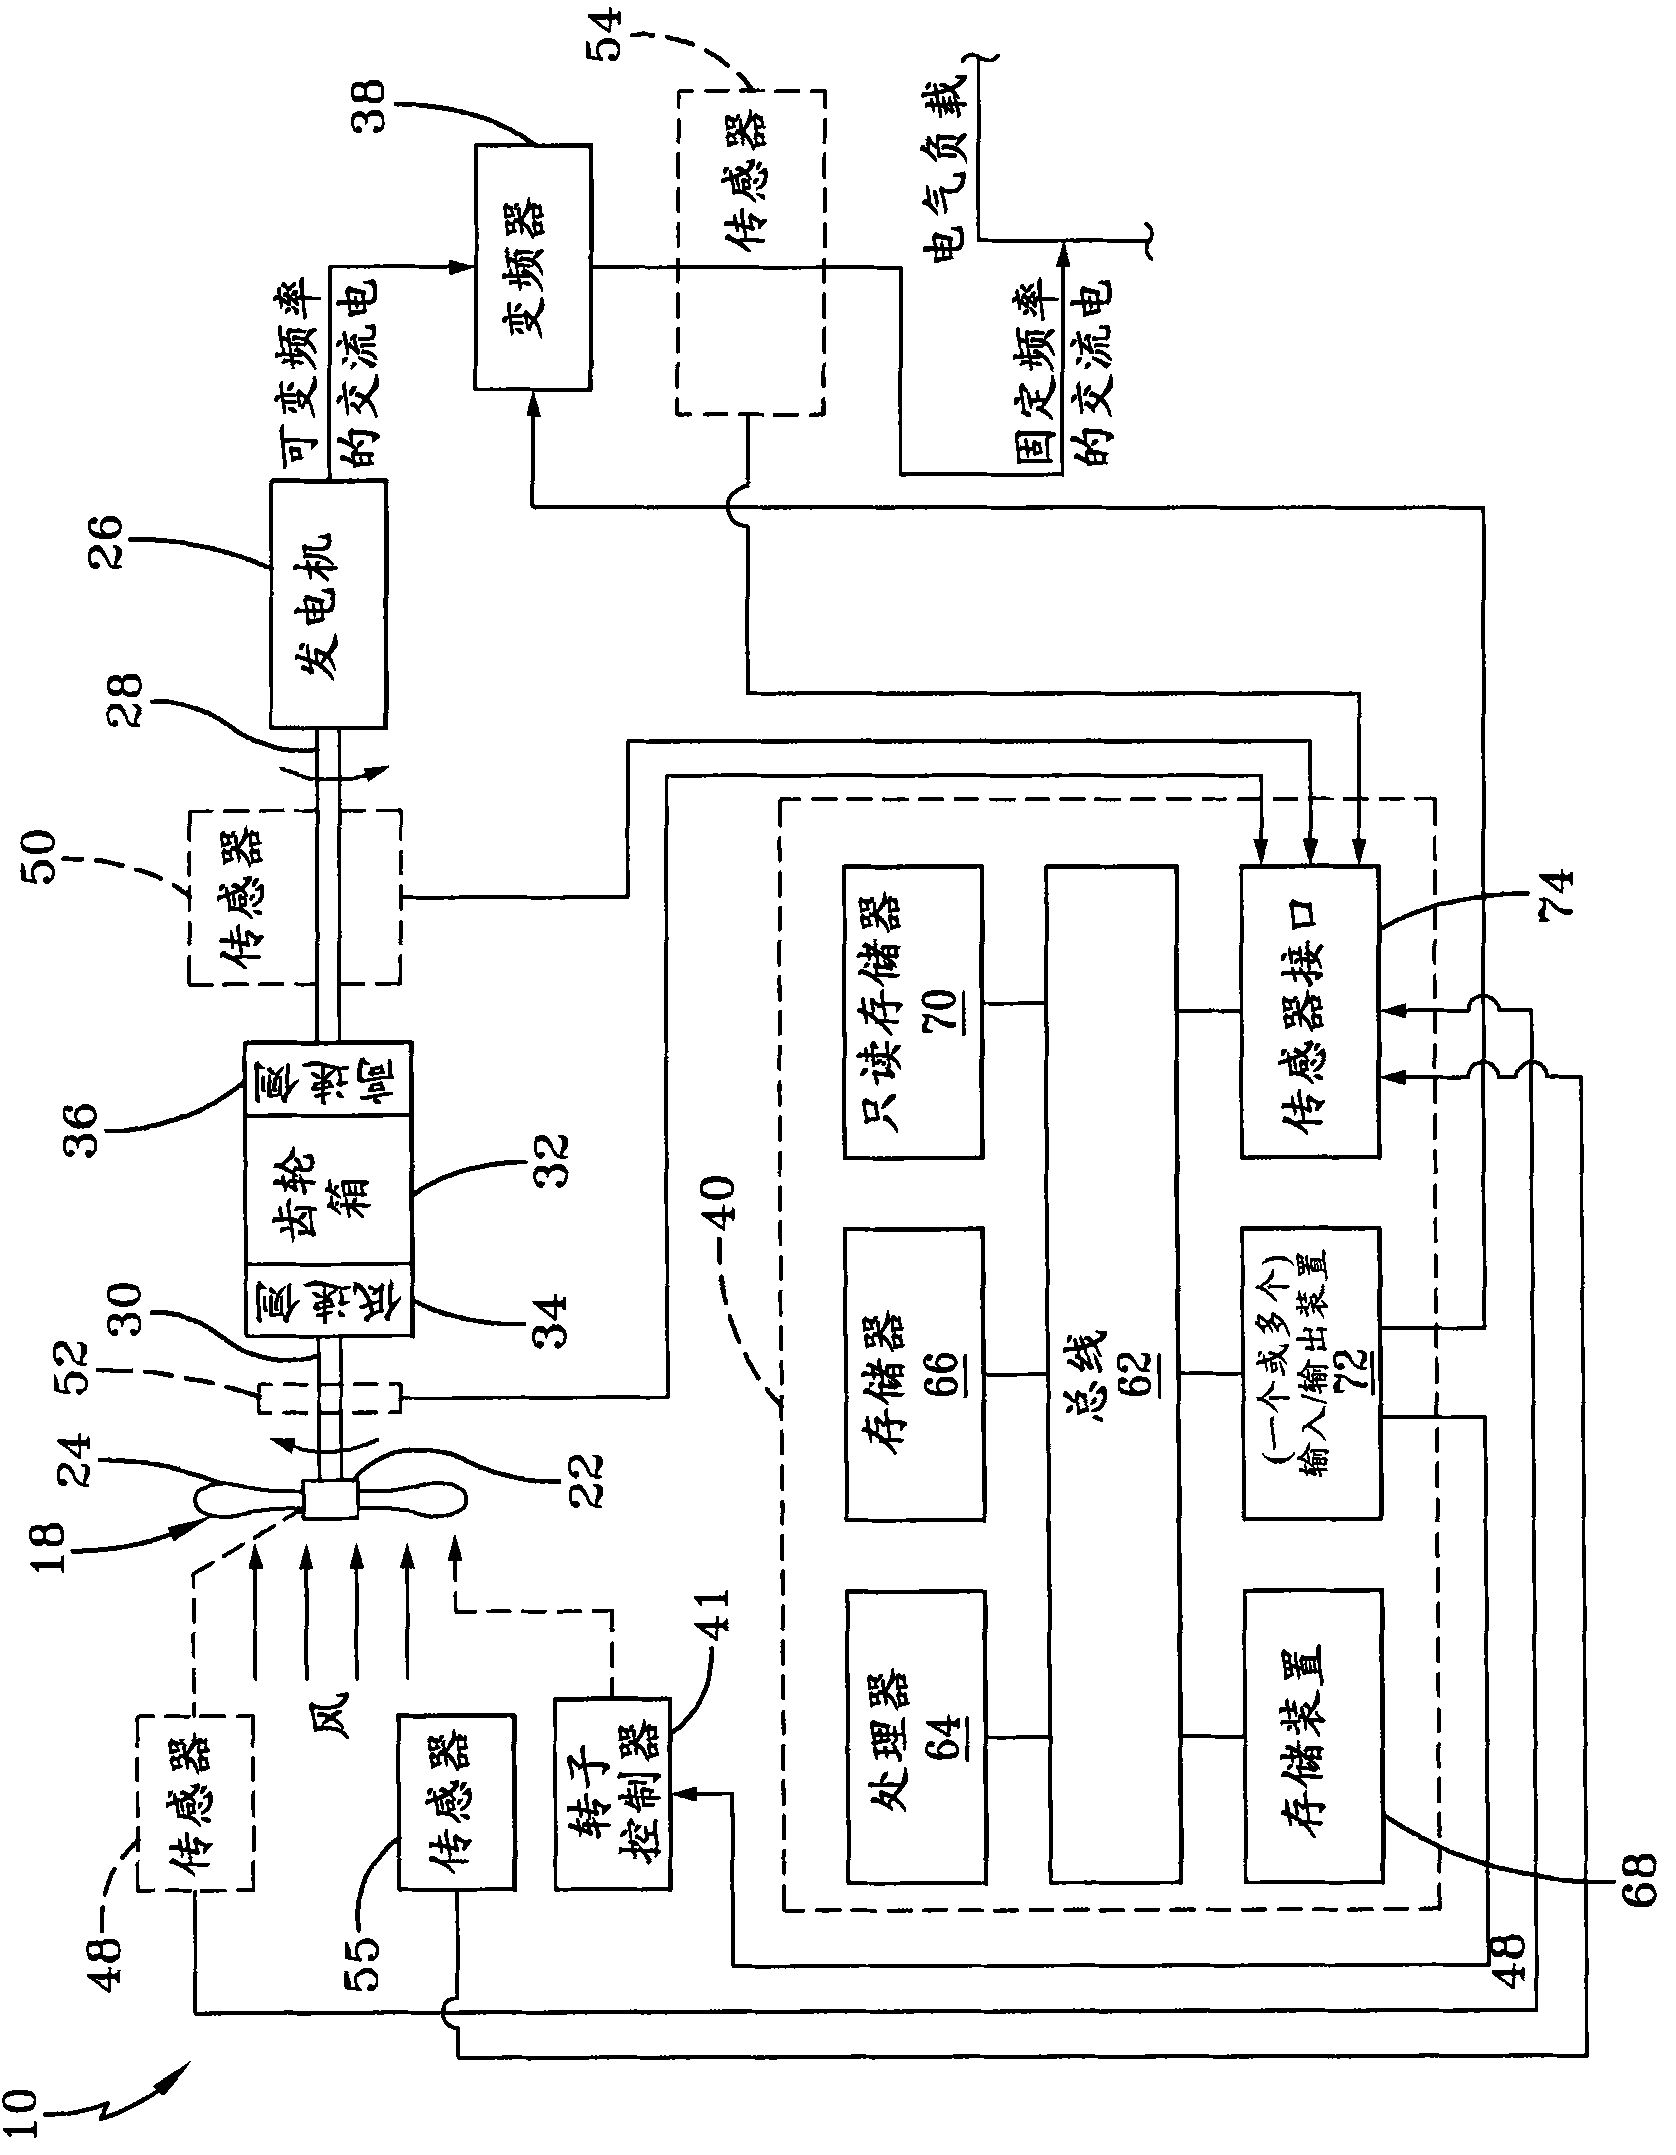 Method and system for noise controlled operation of a wind turbine